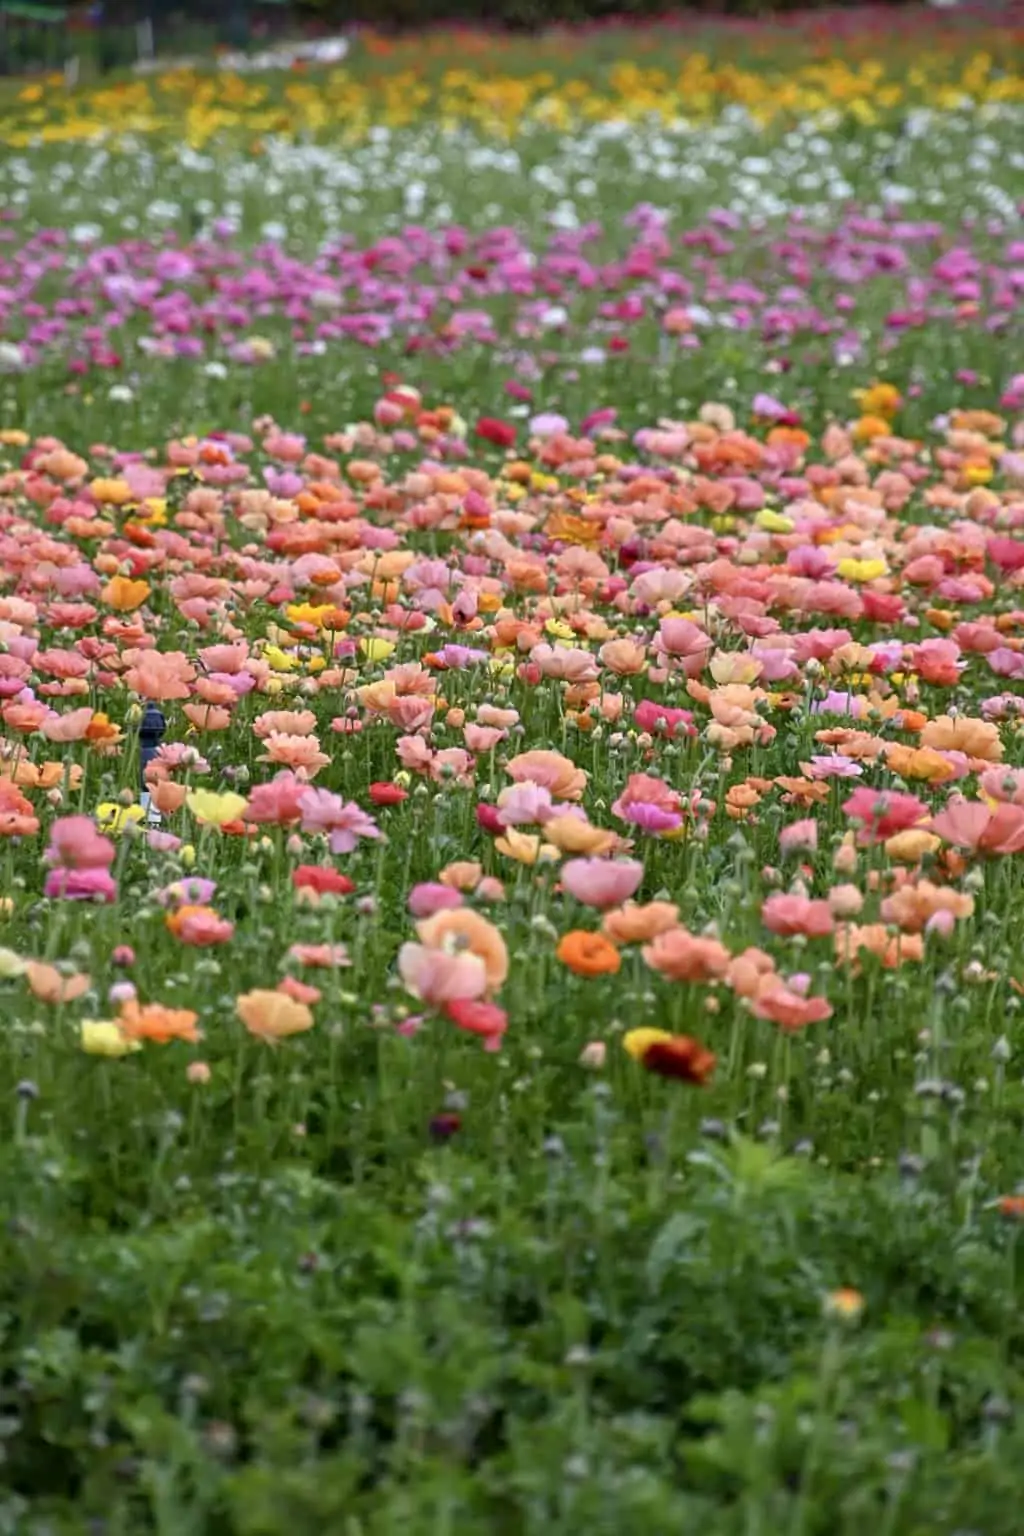 Looking for something fun to do in southern California in spring? Visit the ranunculus fields in Carlsbad. #flowerchasing #springinsouthernCalifornia